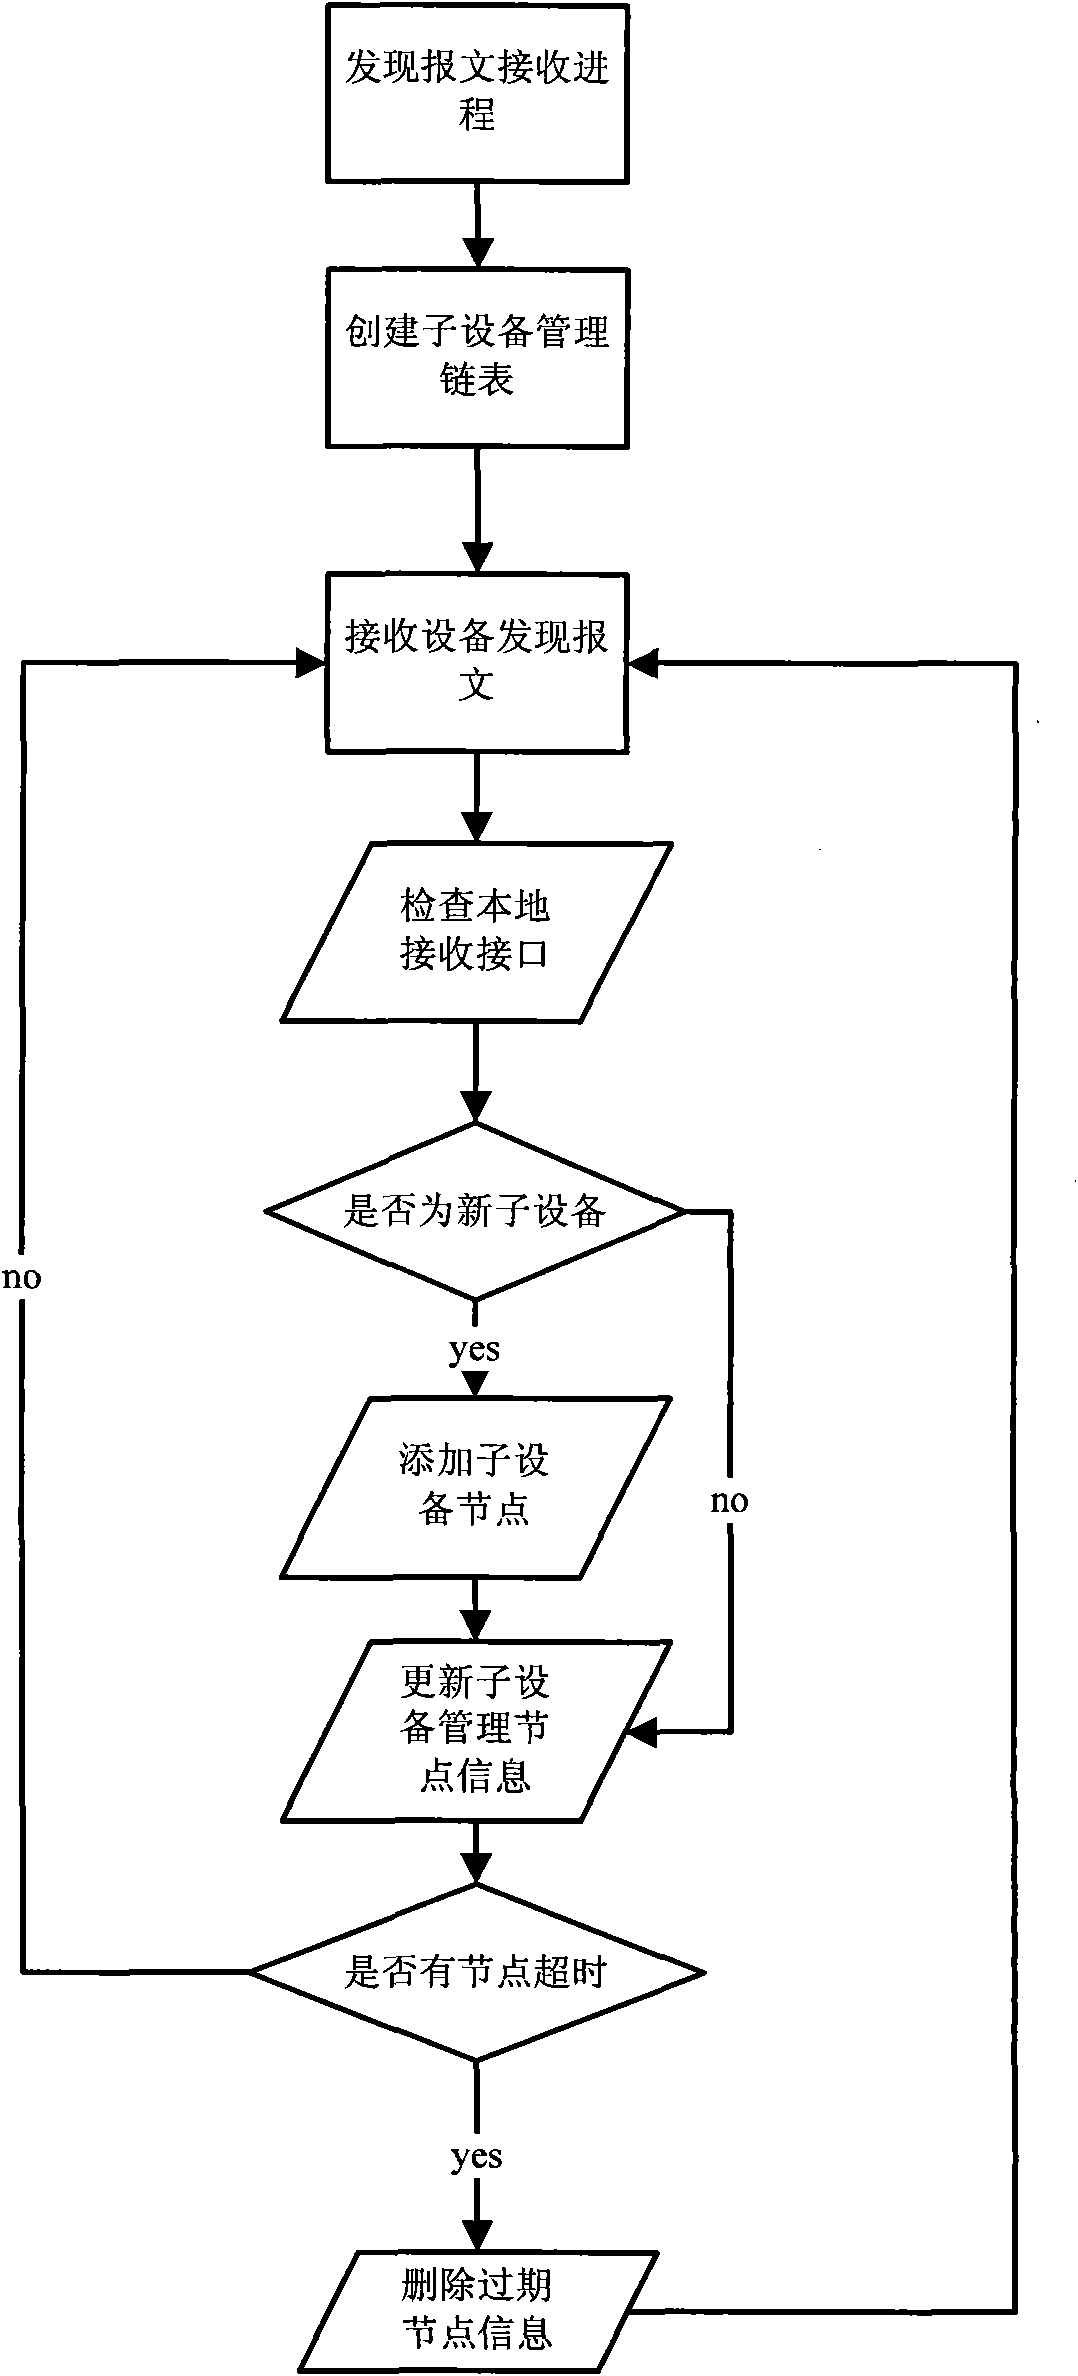 Method for realizing integrated management of multi-board embedded device